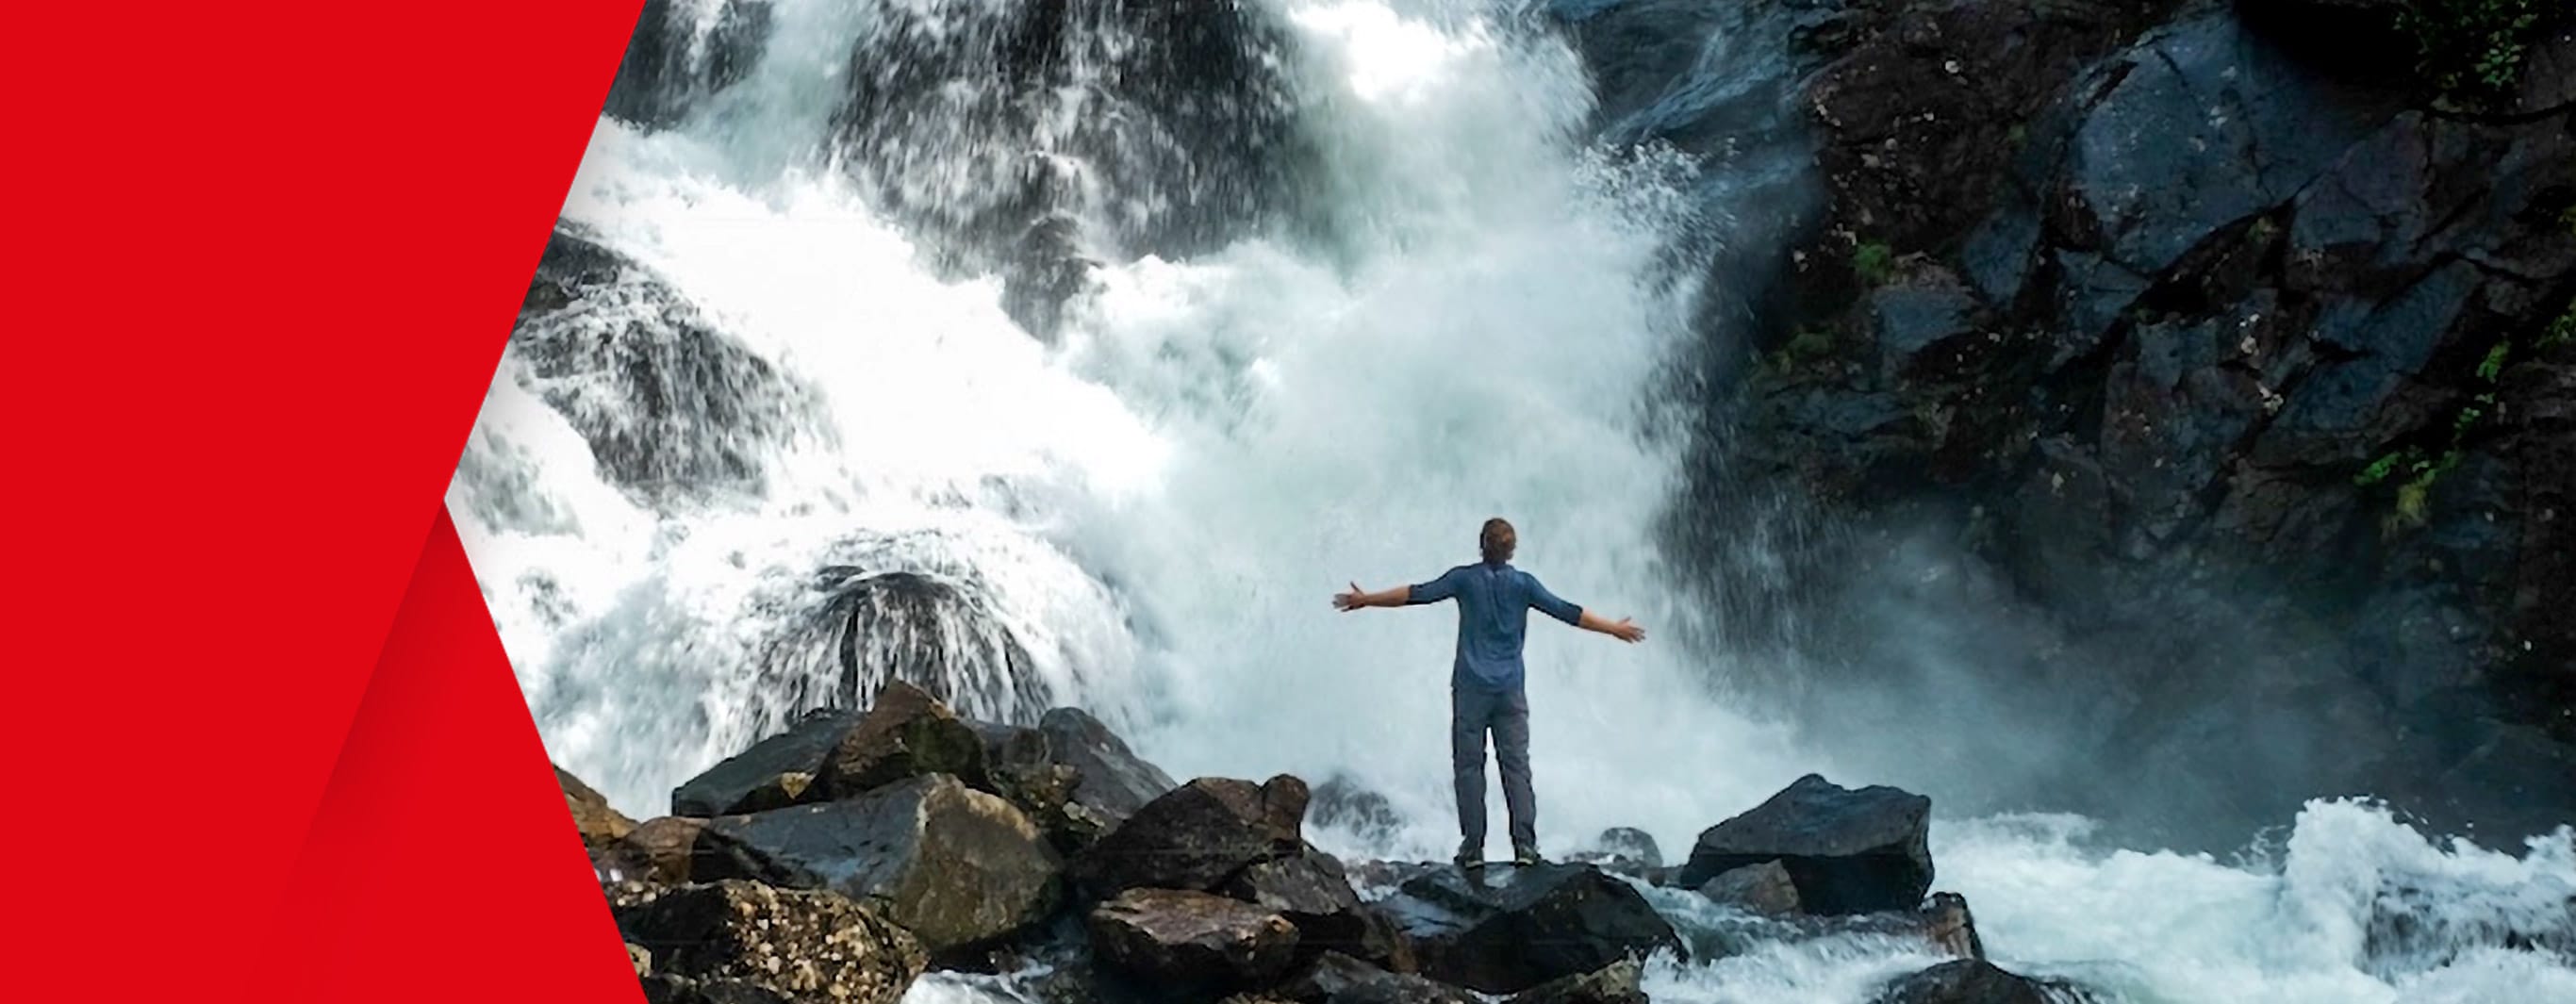 The figure of a man, arms outstretched, is seen standing in front of a huge gushing waterfall 'welcoming' the raging torrents